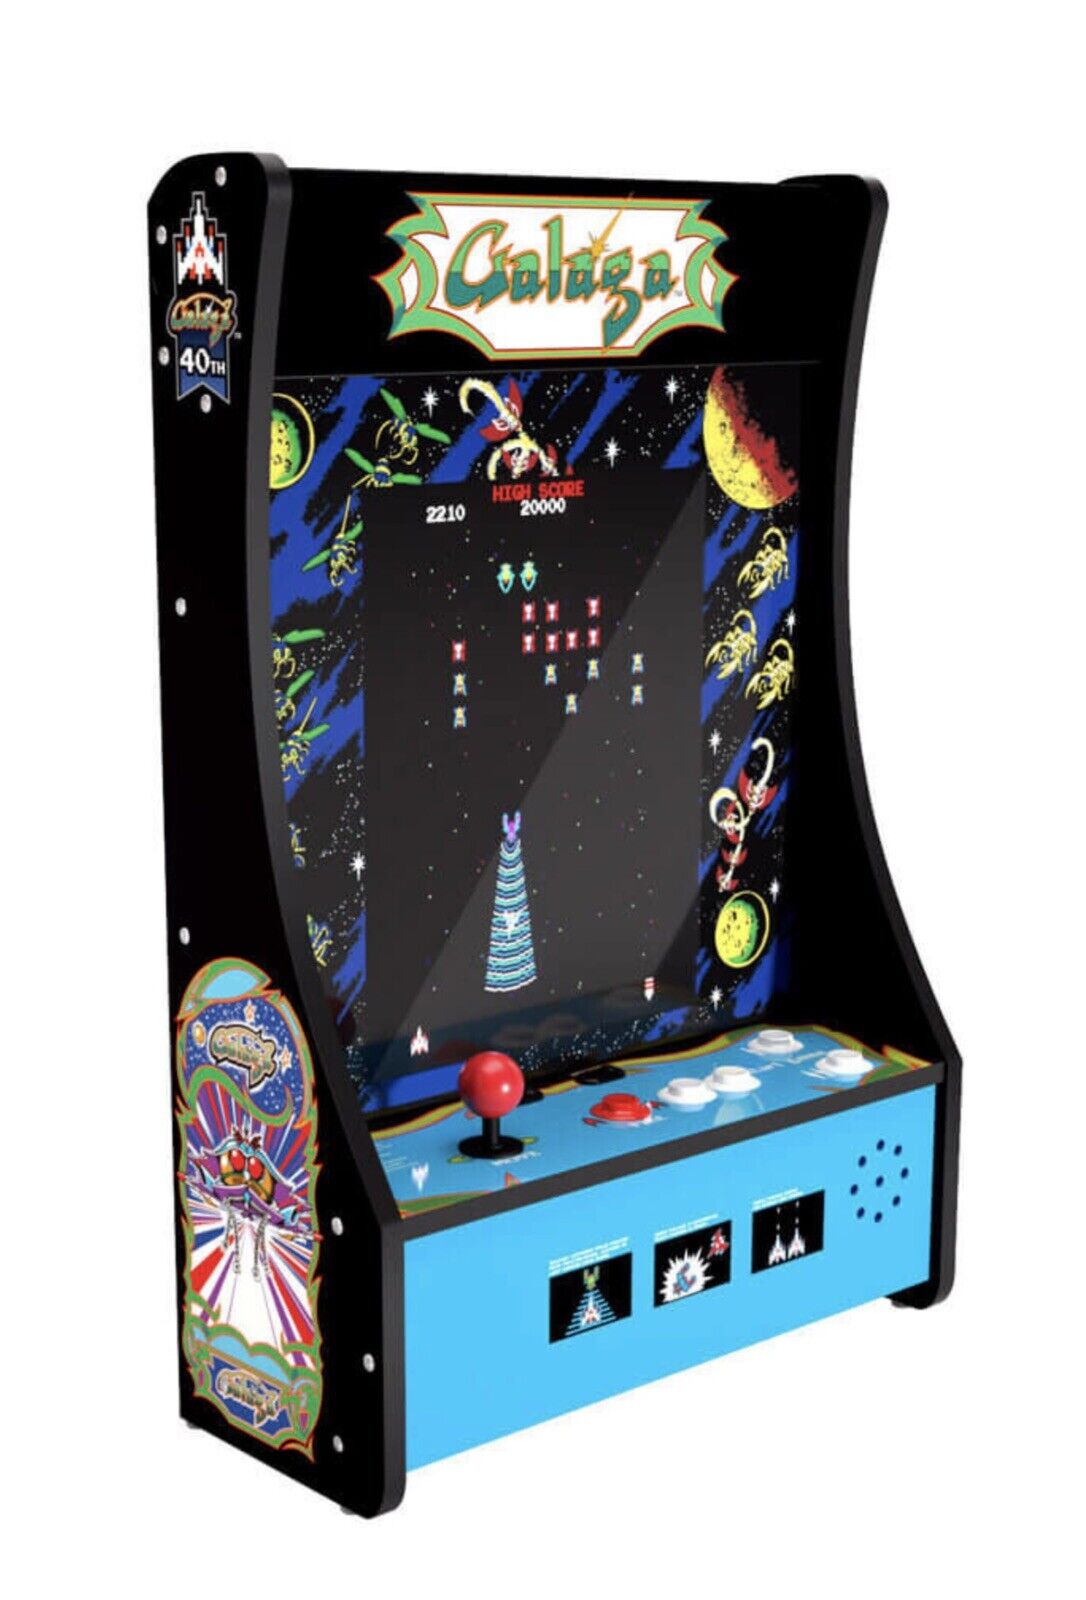 Arcade1Up Galaga 40th Anniversary PartyCade / 10-in-1 Arcade Game - NEW IN BOX